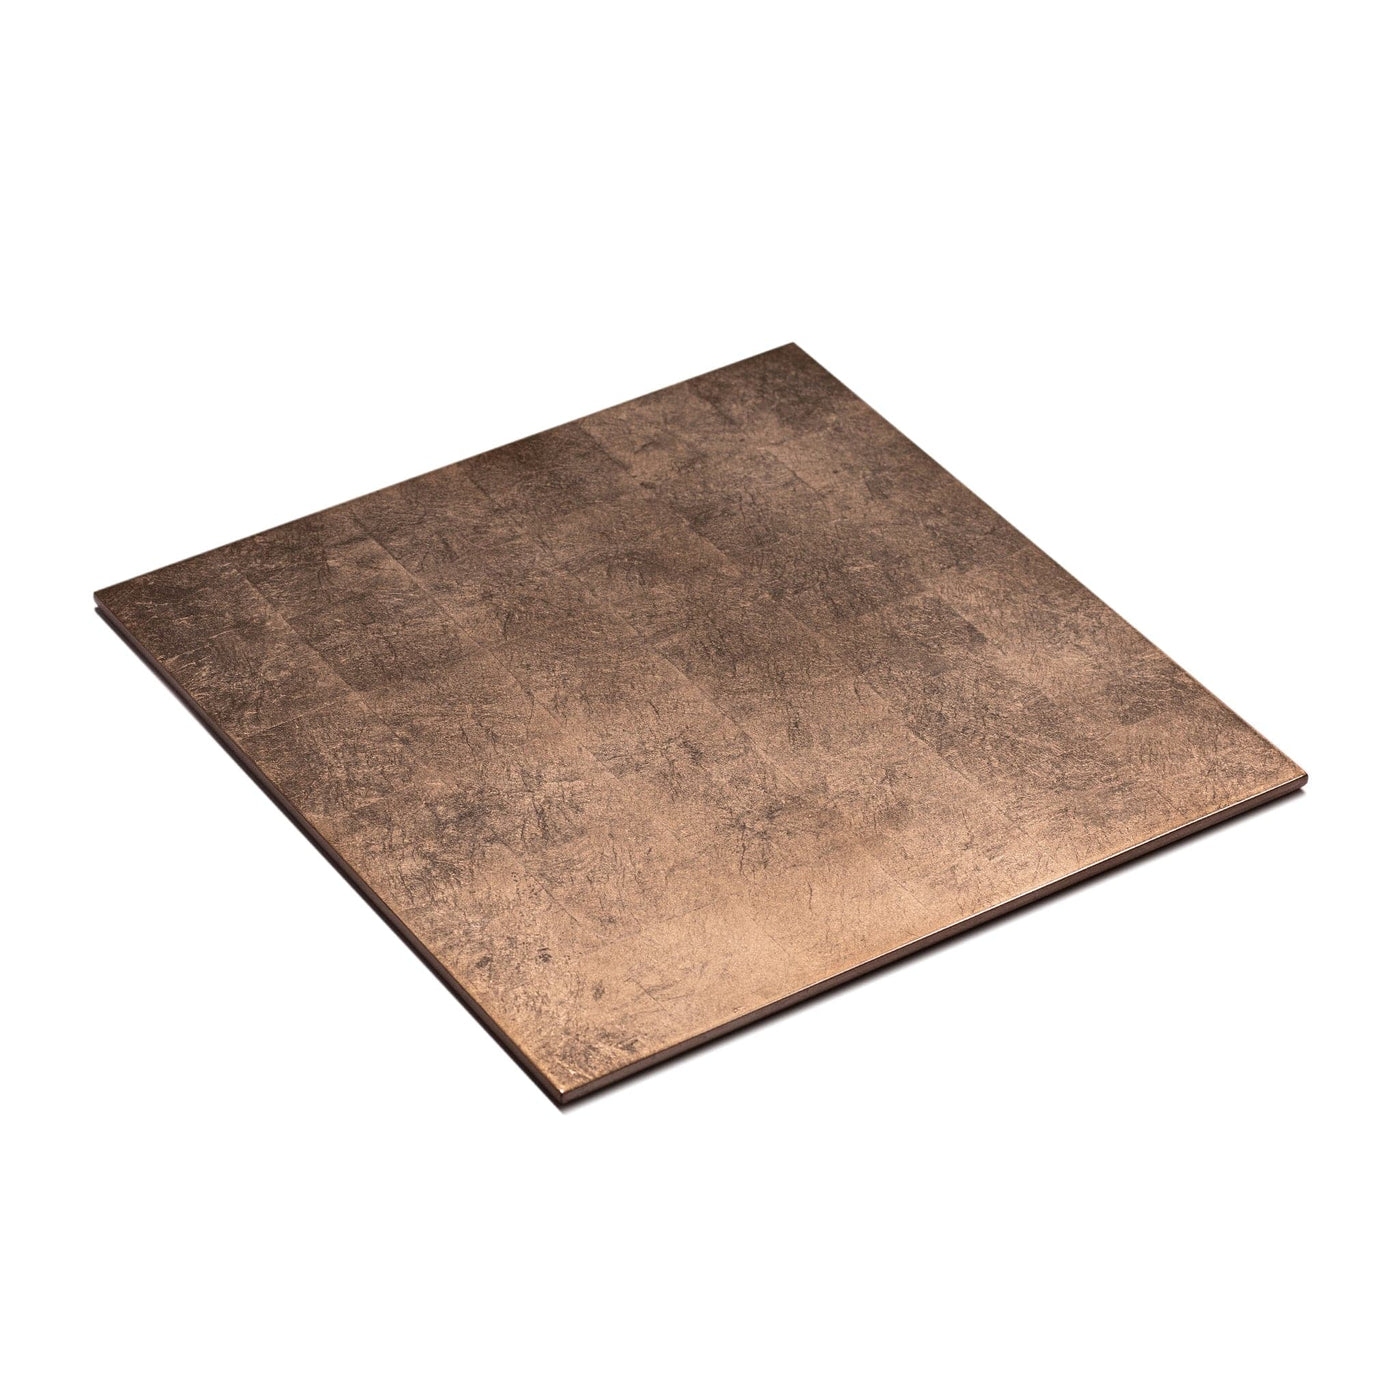 Silver Leaf Placemat Taupe - Posh Trading Company  - Interior furnishings london